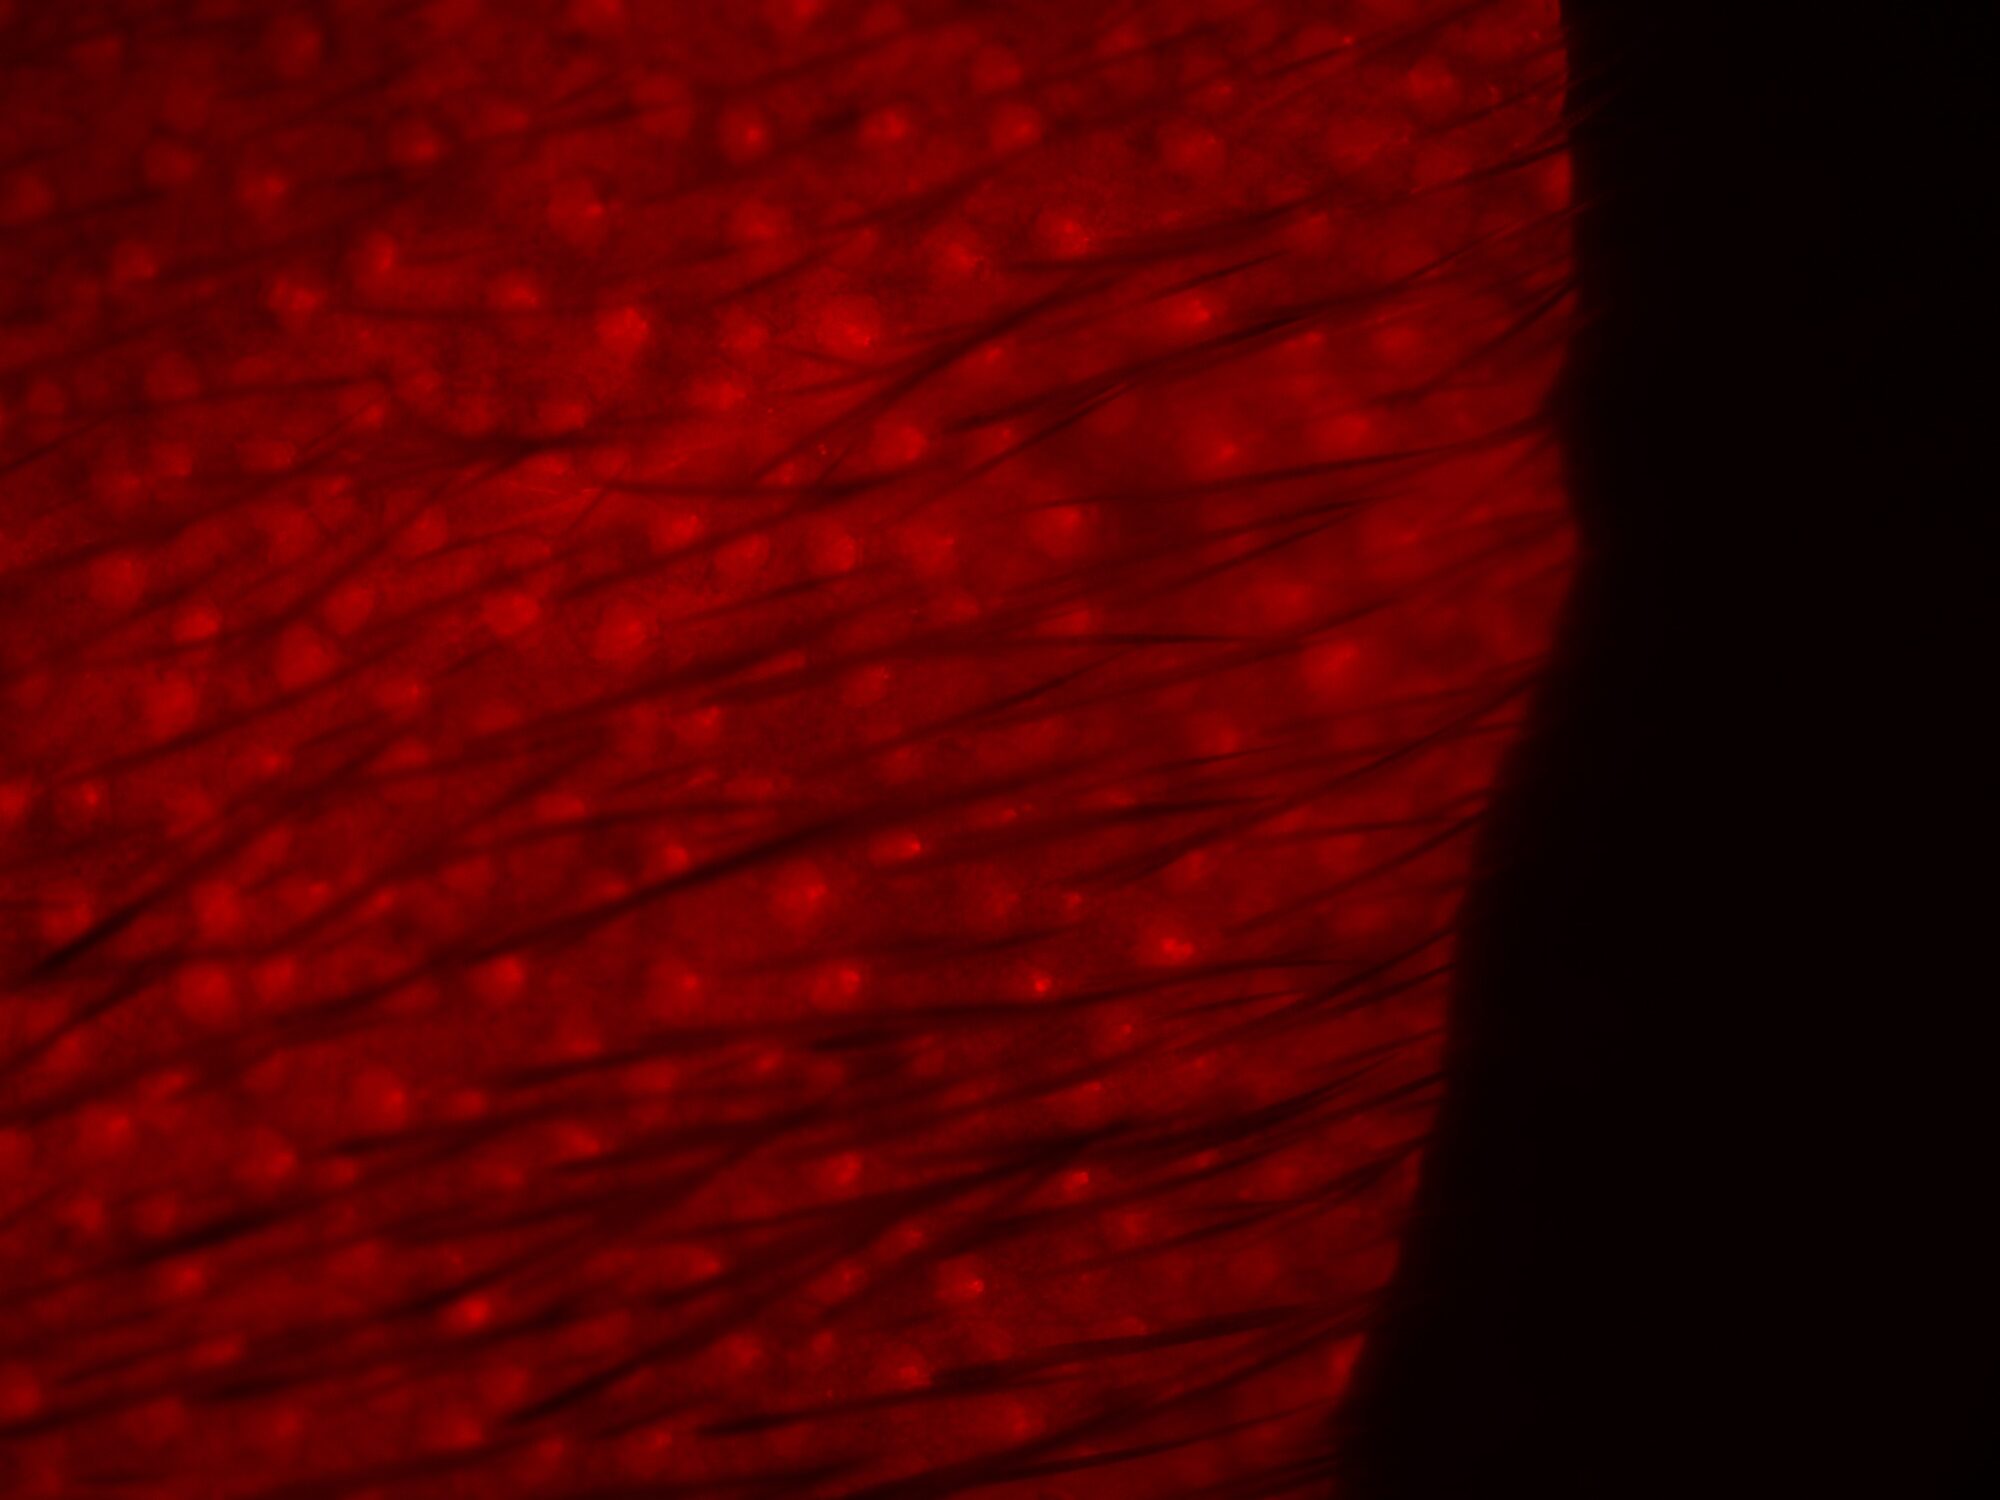 Fluorescent microscope image of an ear punch from a single copy Cag-mCherry transgene knocked-into the H11 locus using CRISPR-Cas9